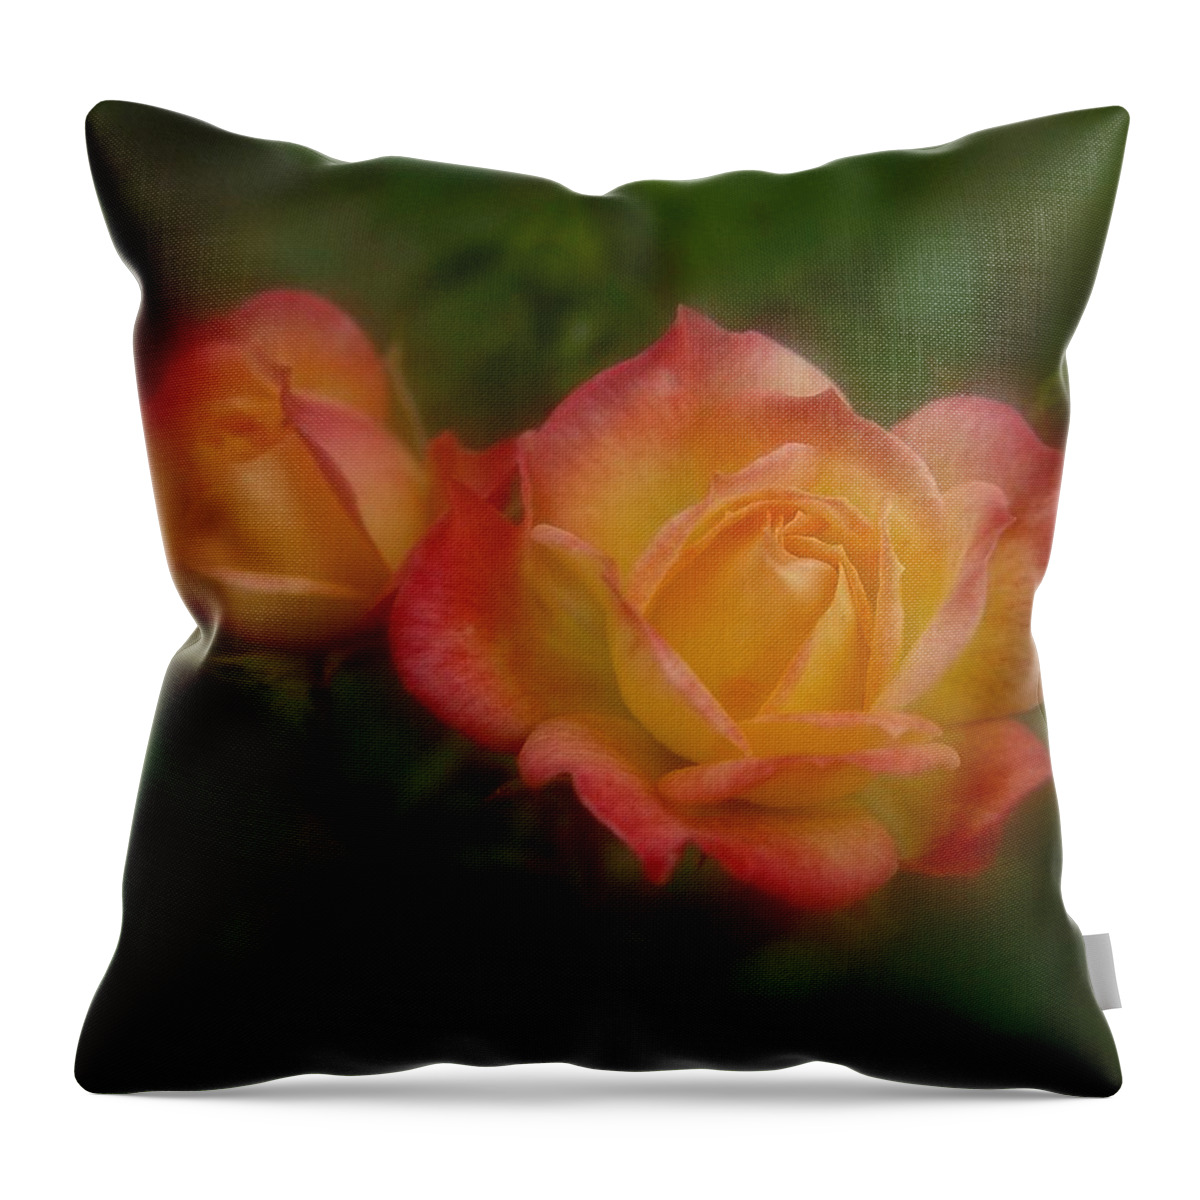 Two Roses Throw Pillow featuring the photograph 2 Roses by Richard Cummings